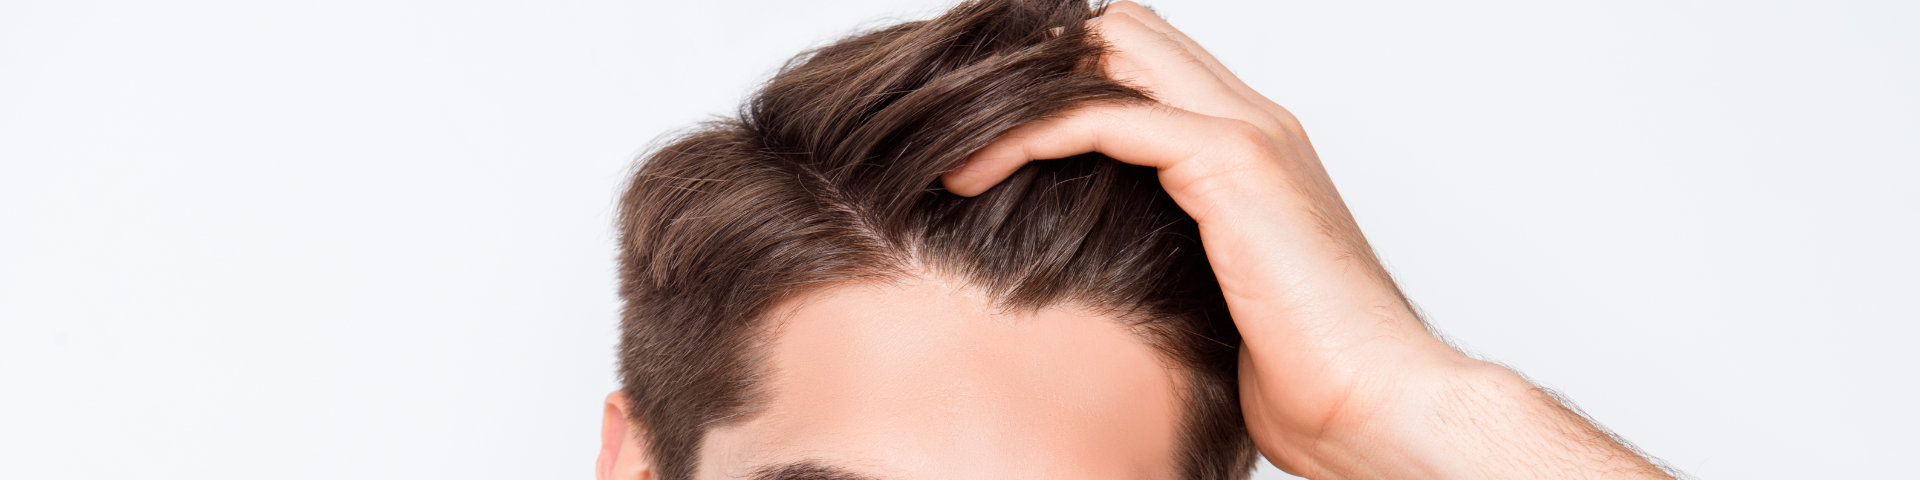 Revitalizing Tresses: Combating Hair Loss with PRP Injections Pasadena, CA